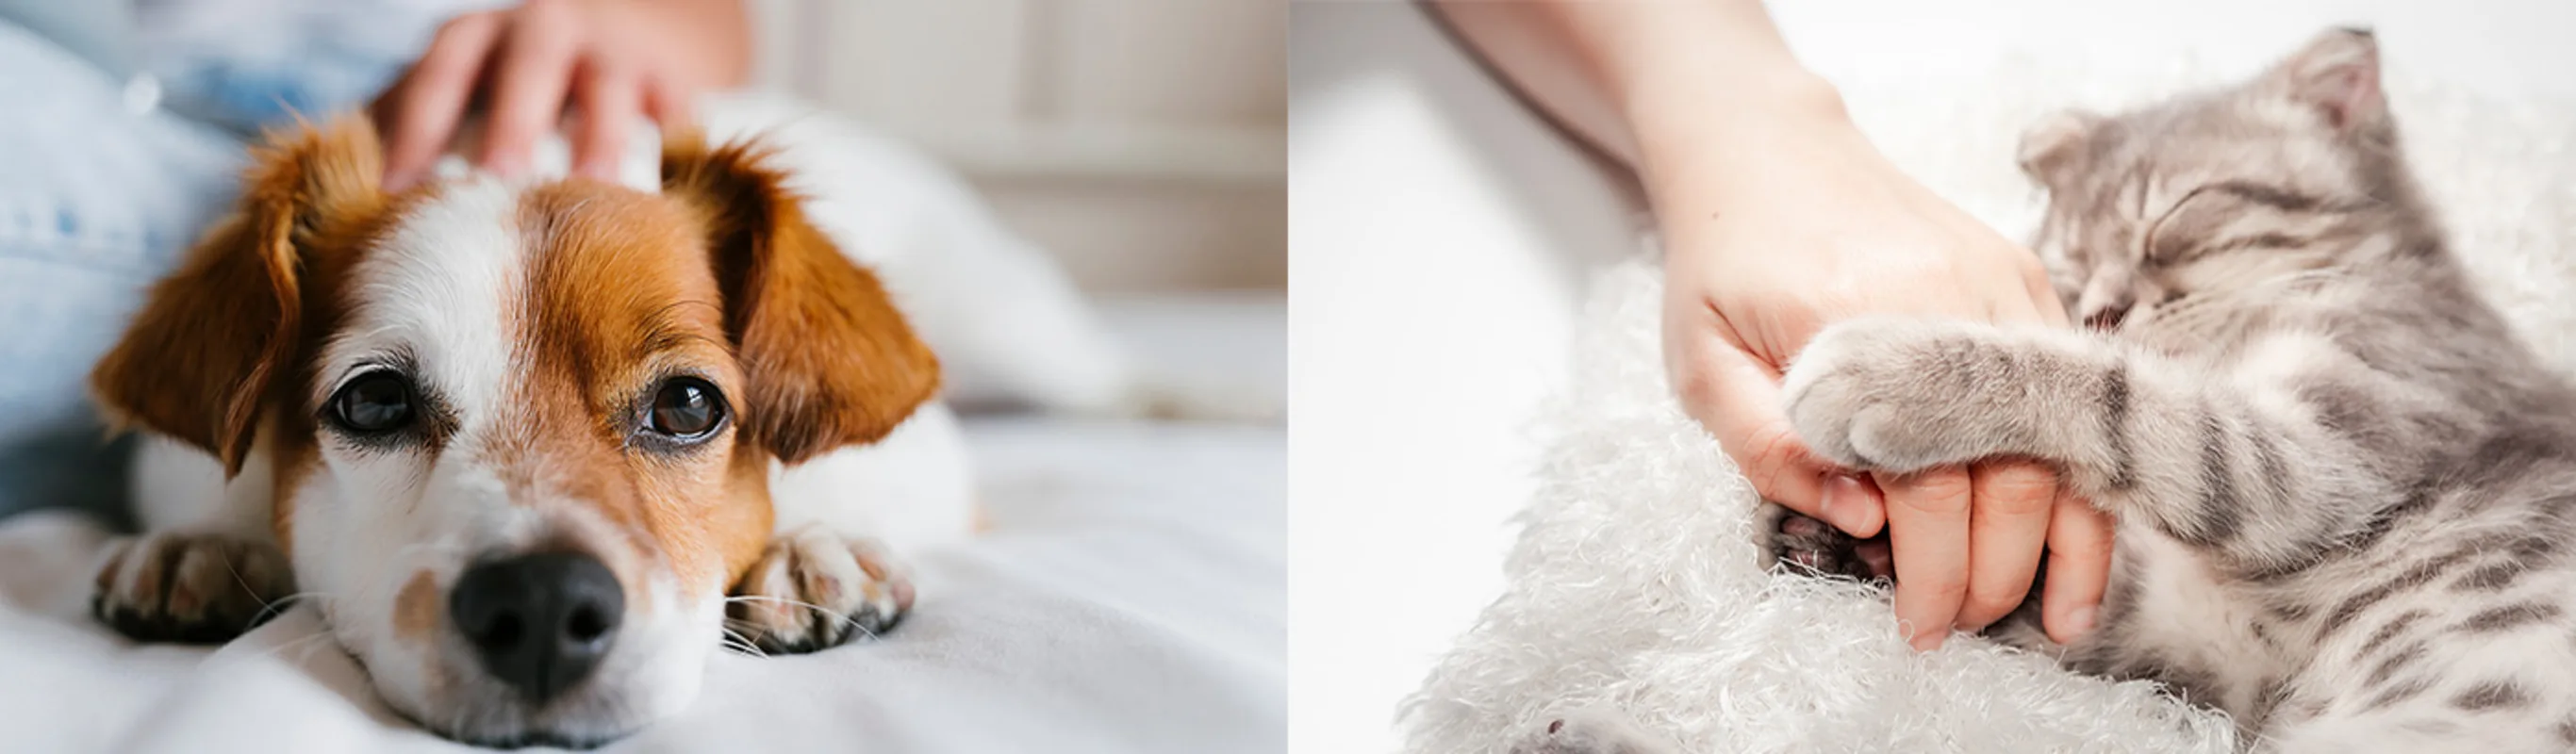 Two images- left image is close up of dog's face while he is laying down and right image is cat holding a person's hand as they sleep